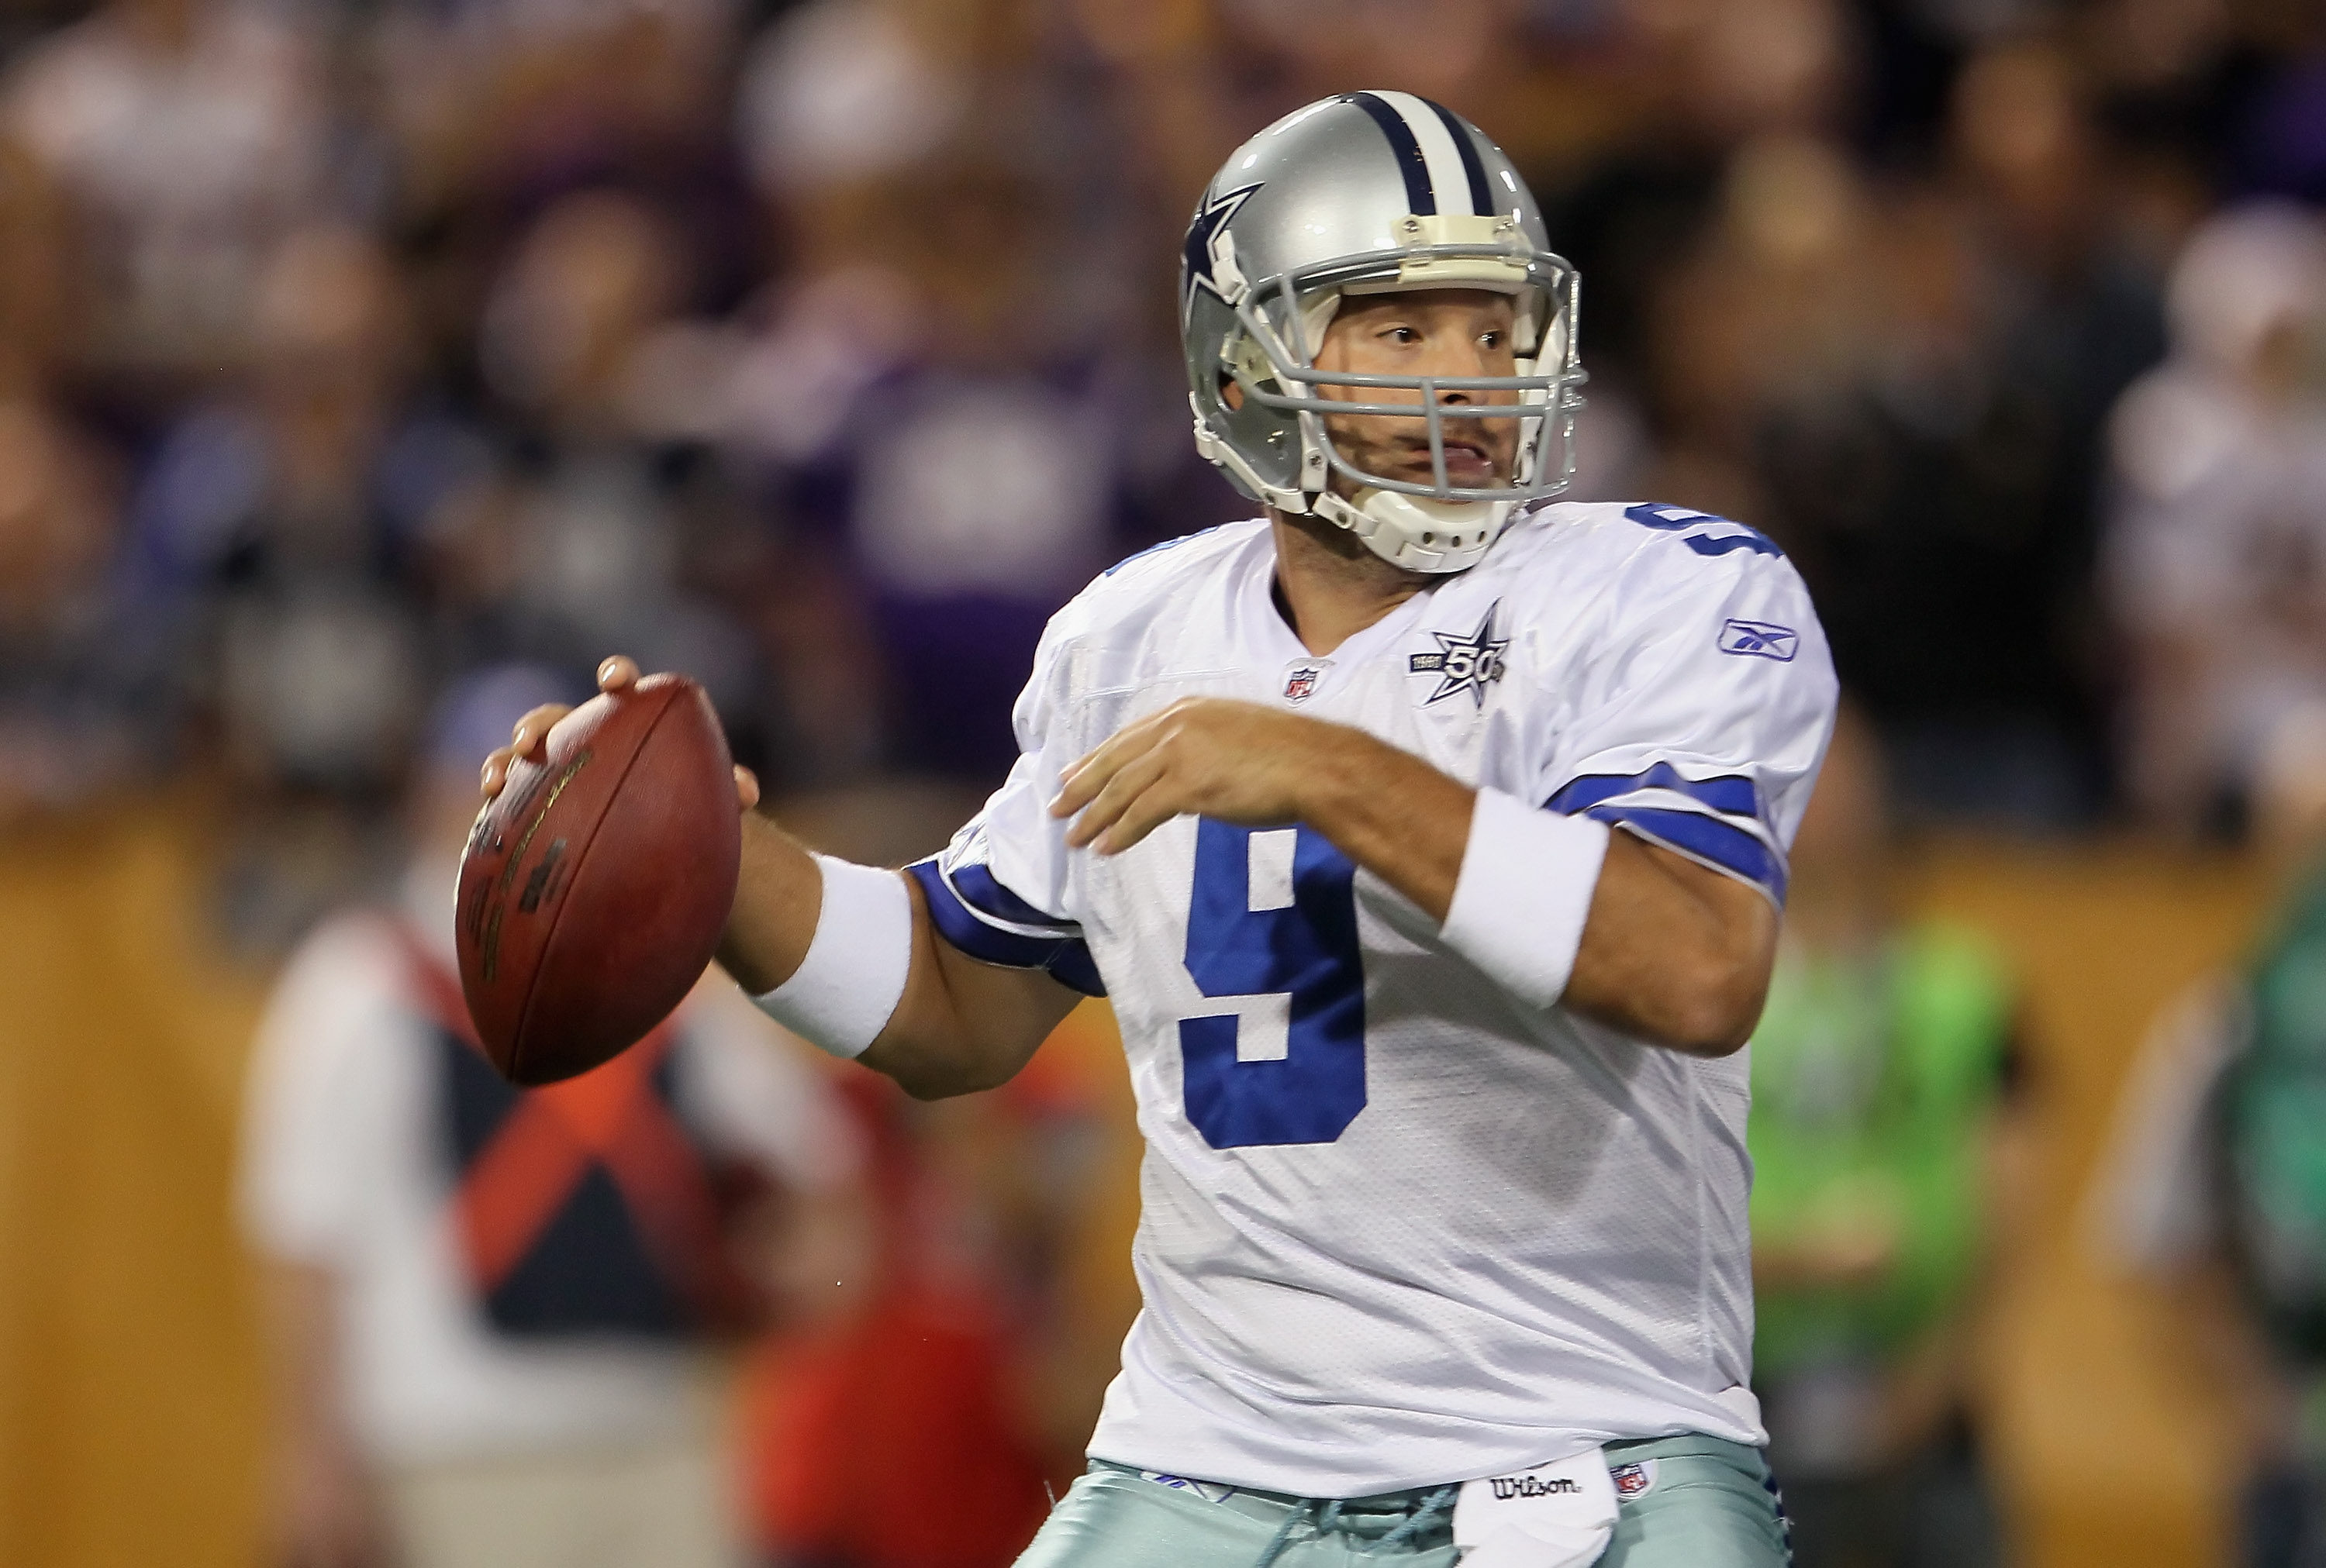 MINNEAPOLIS - OCTOBER 17:  Quarterback Tony Romo #9 of the Dallas Cowboys drops back to pass in the first quarter against the Minnesota Vikings at Mall of America Field on October 17, 2010 in Minneapolis, Minnesota.  (Photo by Jeff Gross/Getty Images)